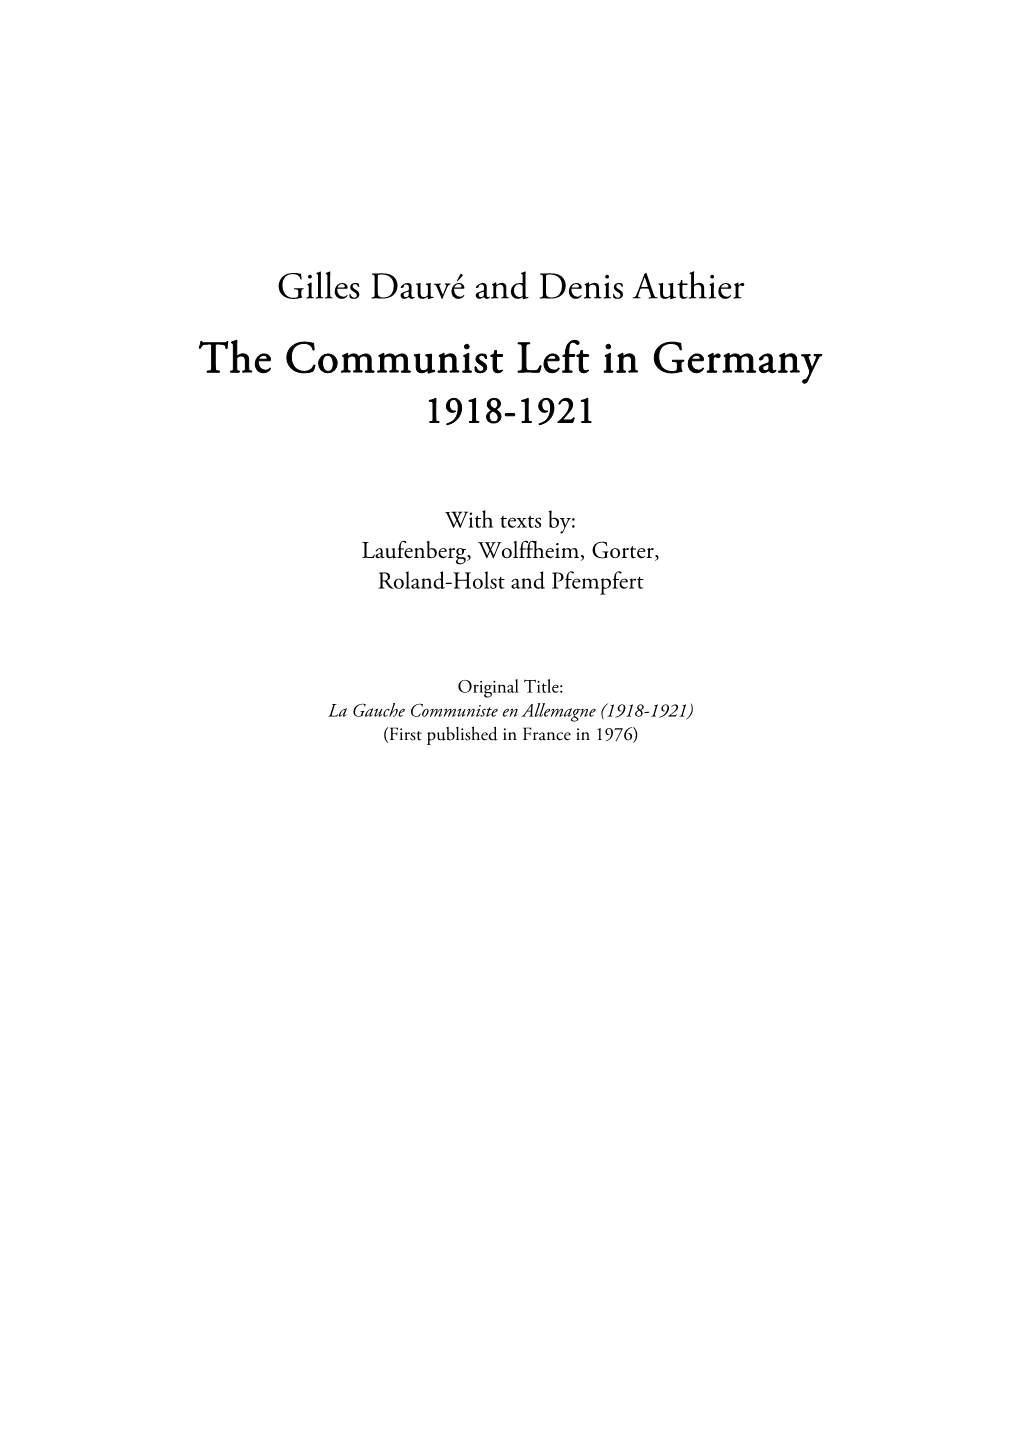 The Communist Left in Germany 1918-1921